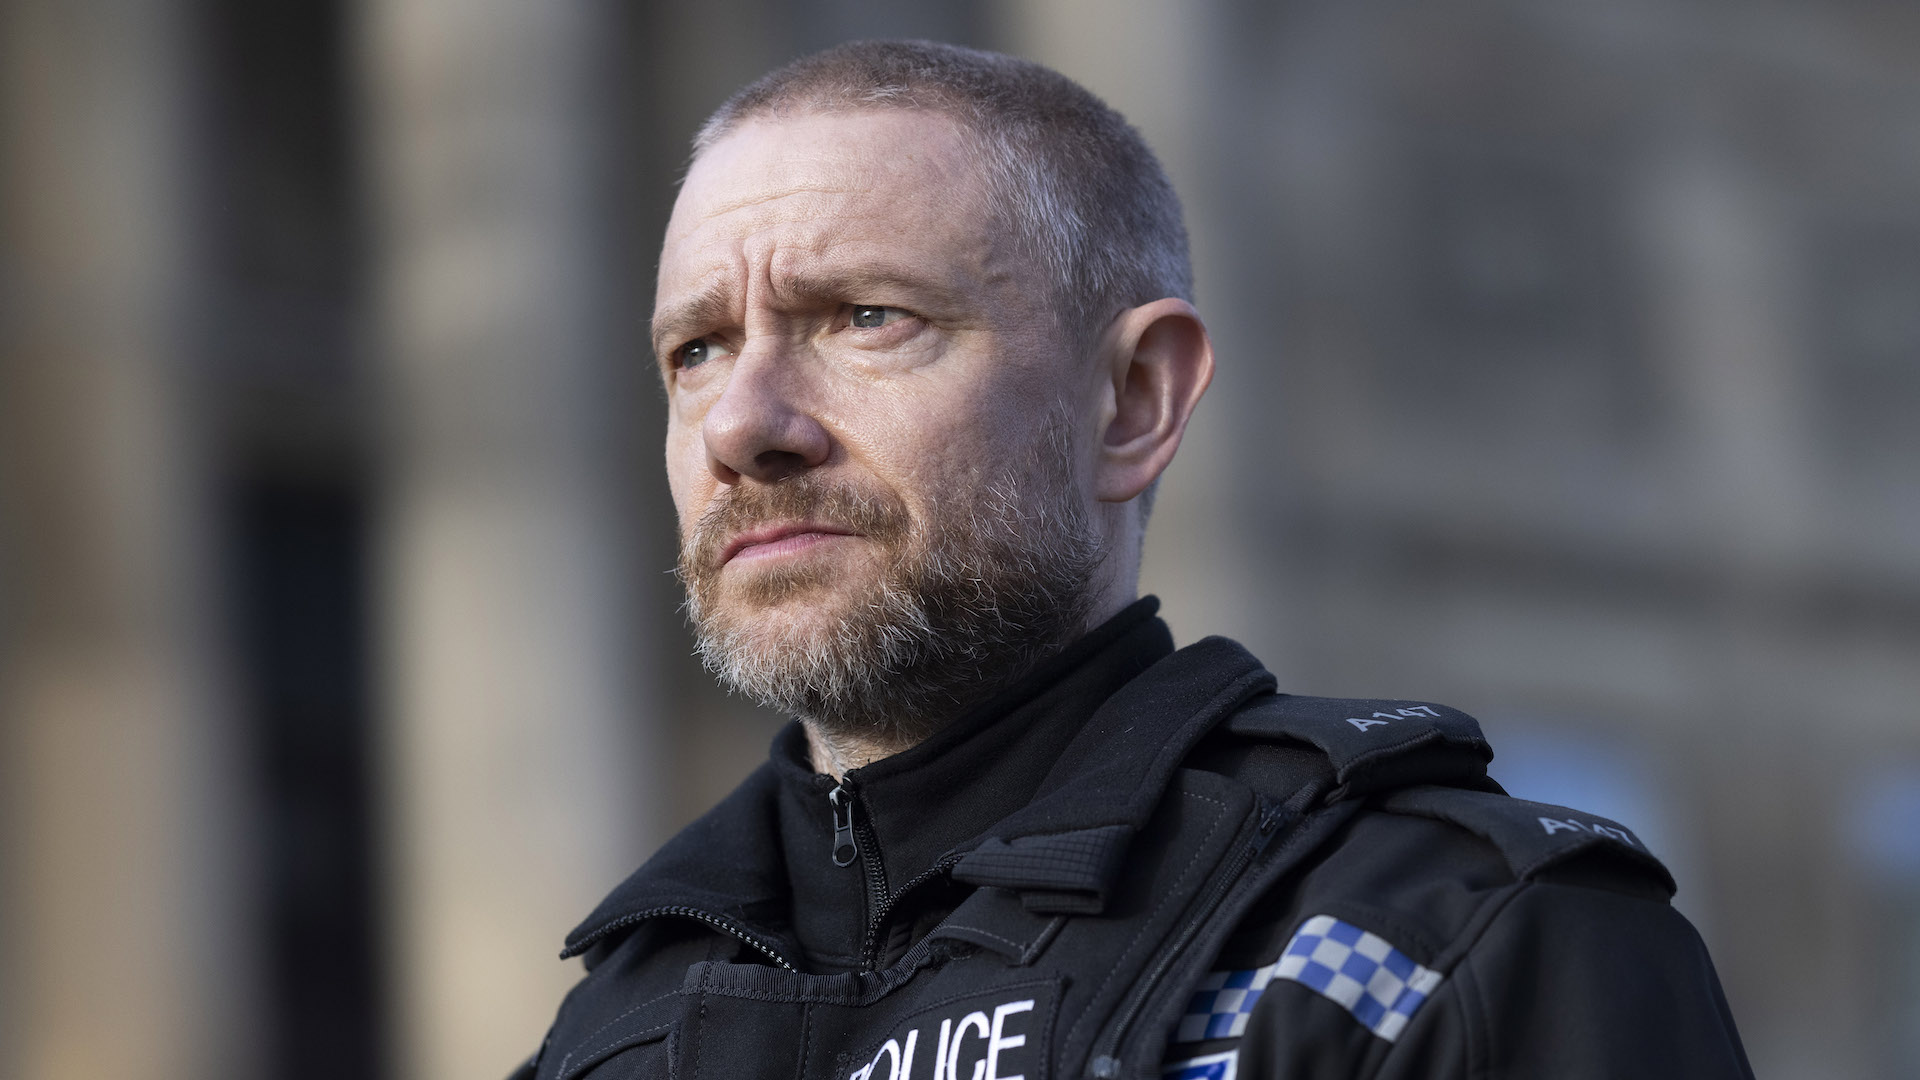 Martin Freeman is back on the BBC in new police series The Responder.